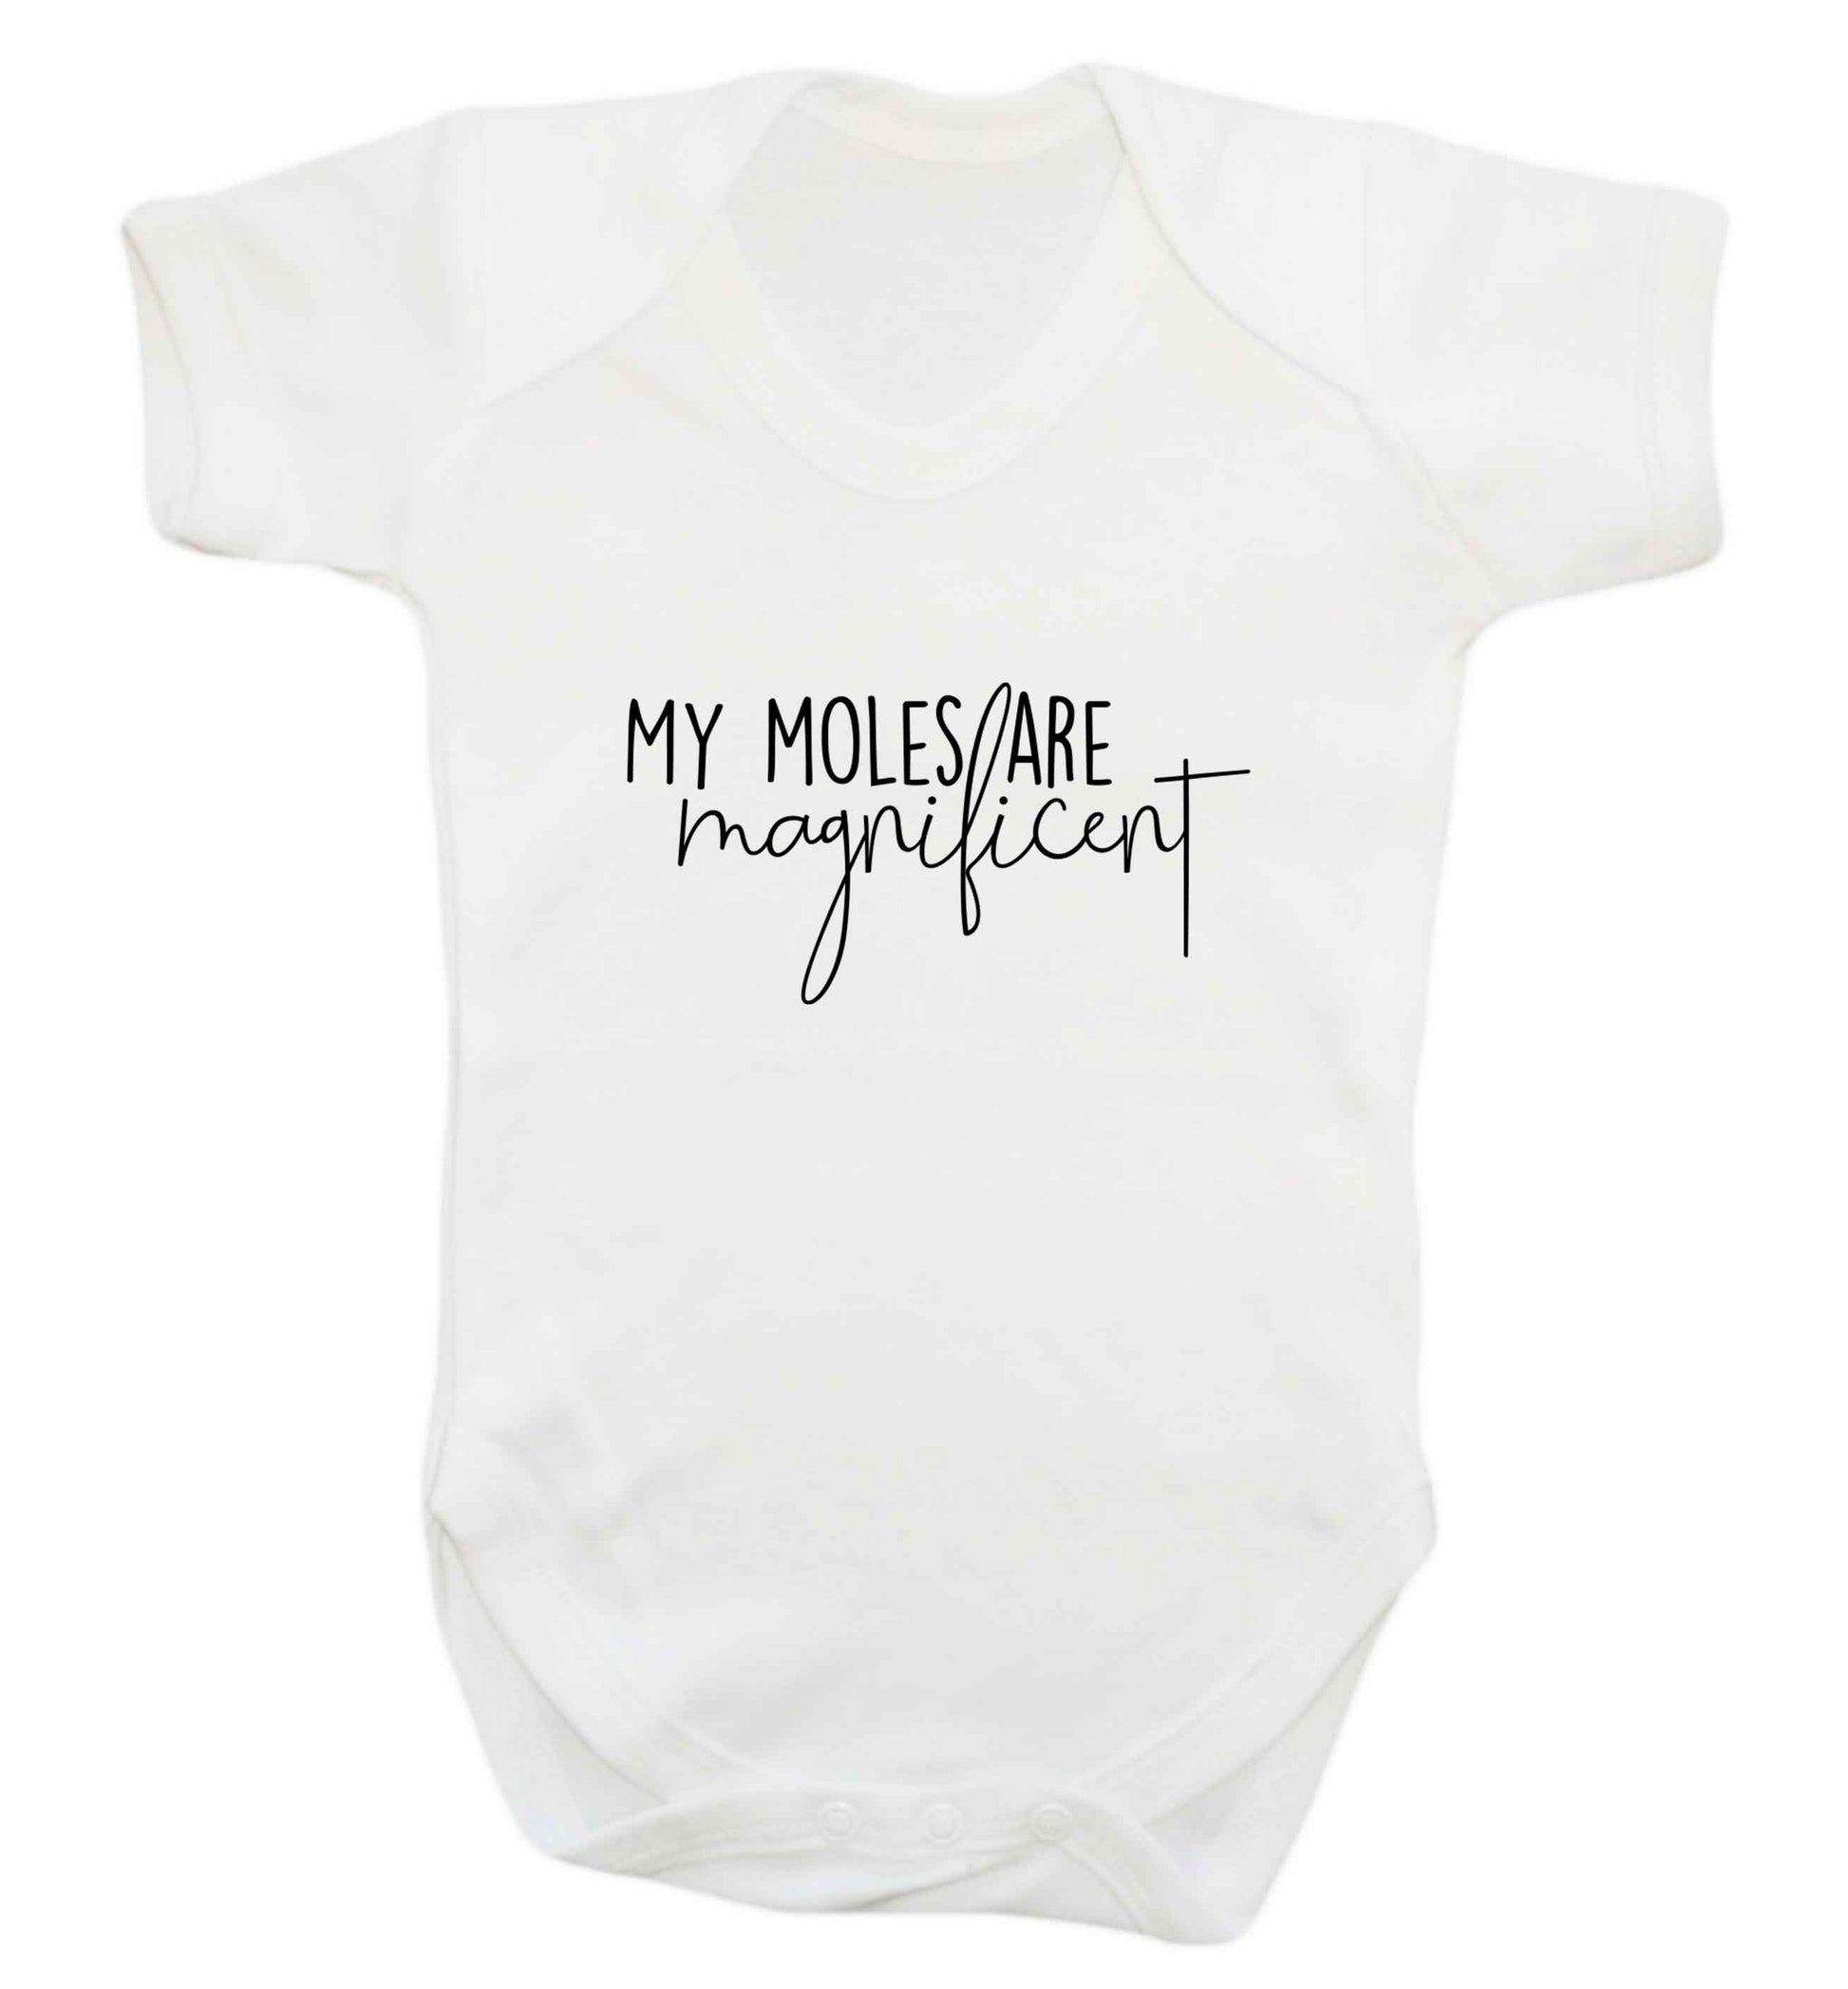 My moles are magnificent baby vest white 18-24 months